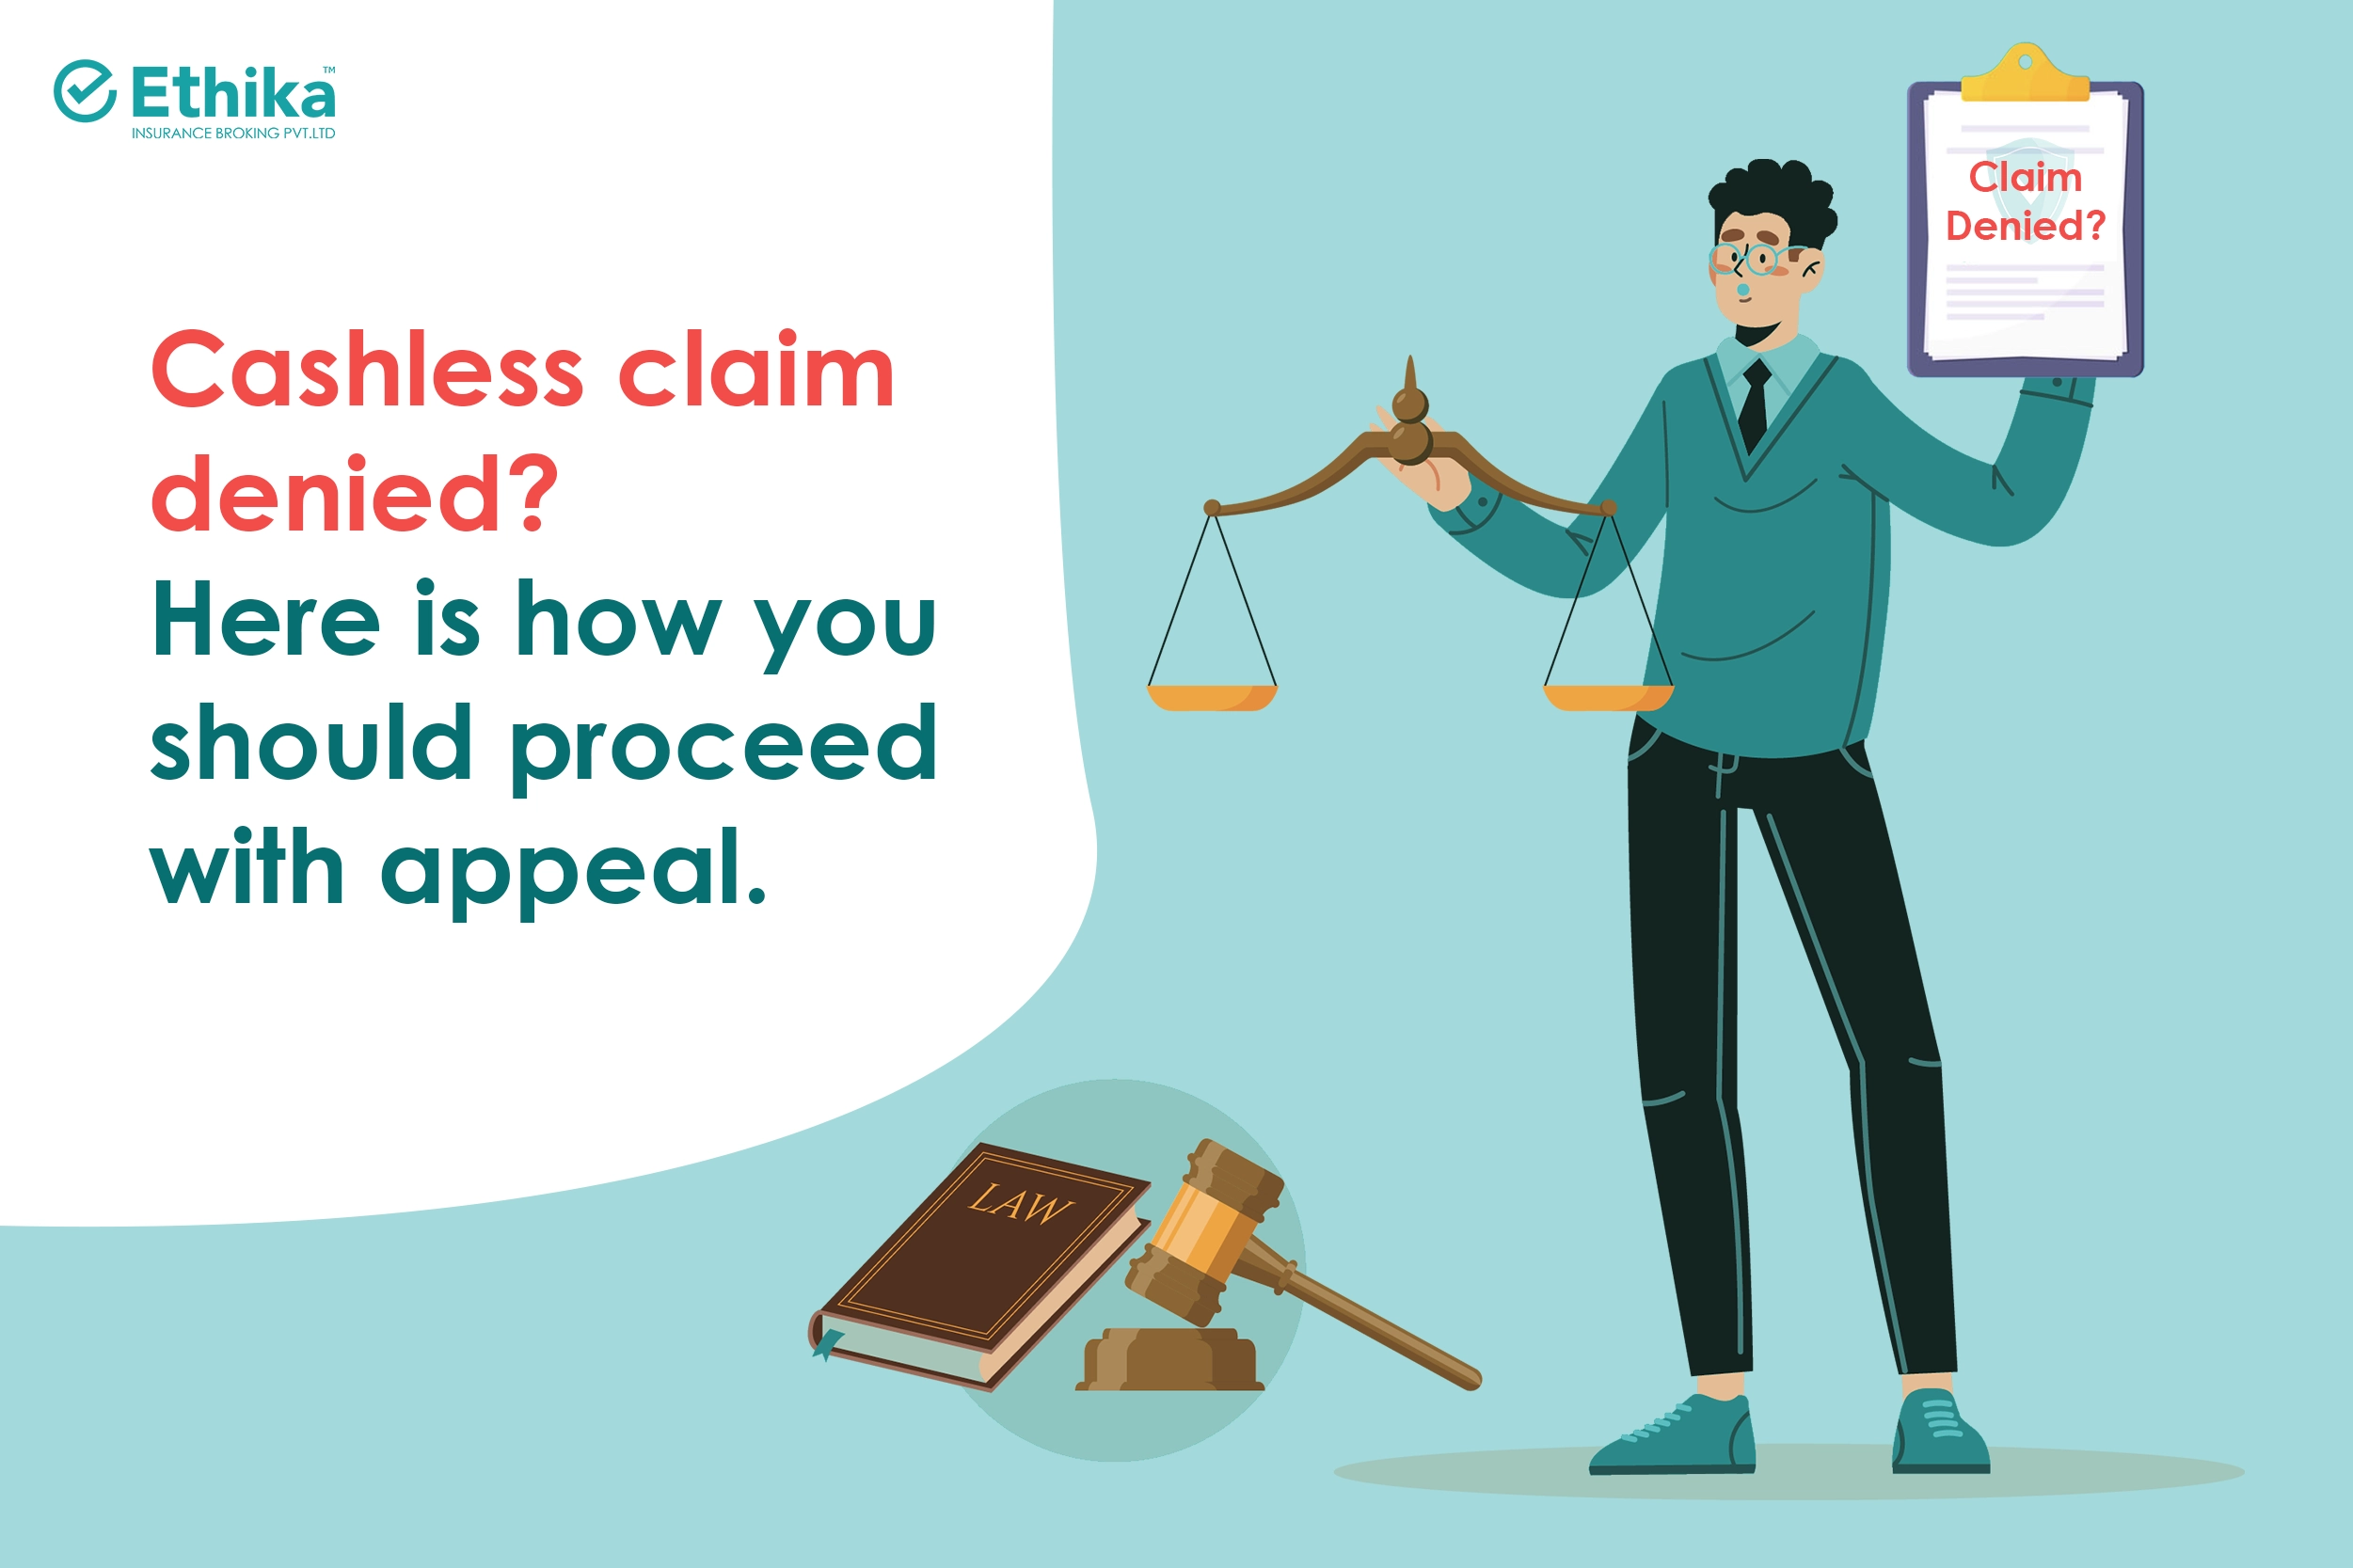 Cashless claim denied? Here is how you should proceed with appeal.